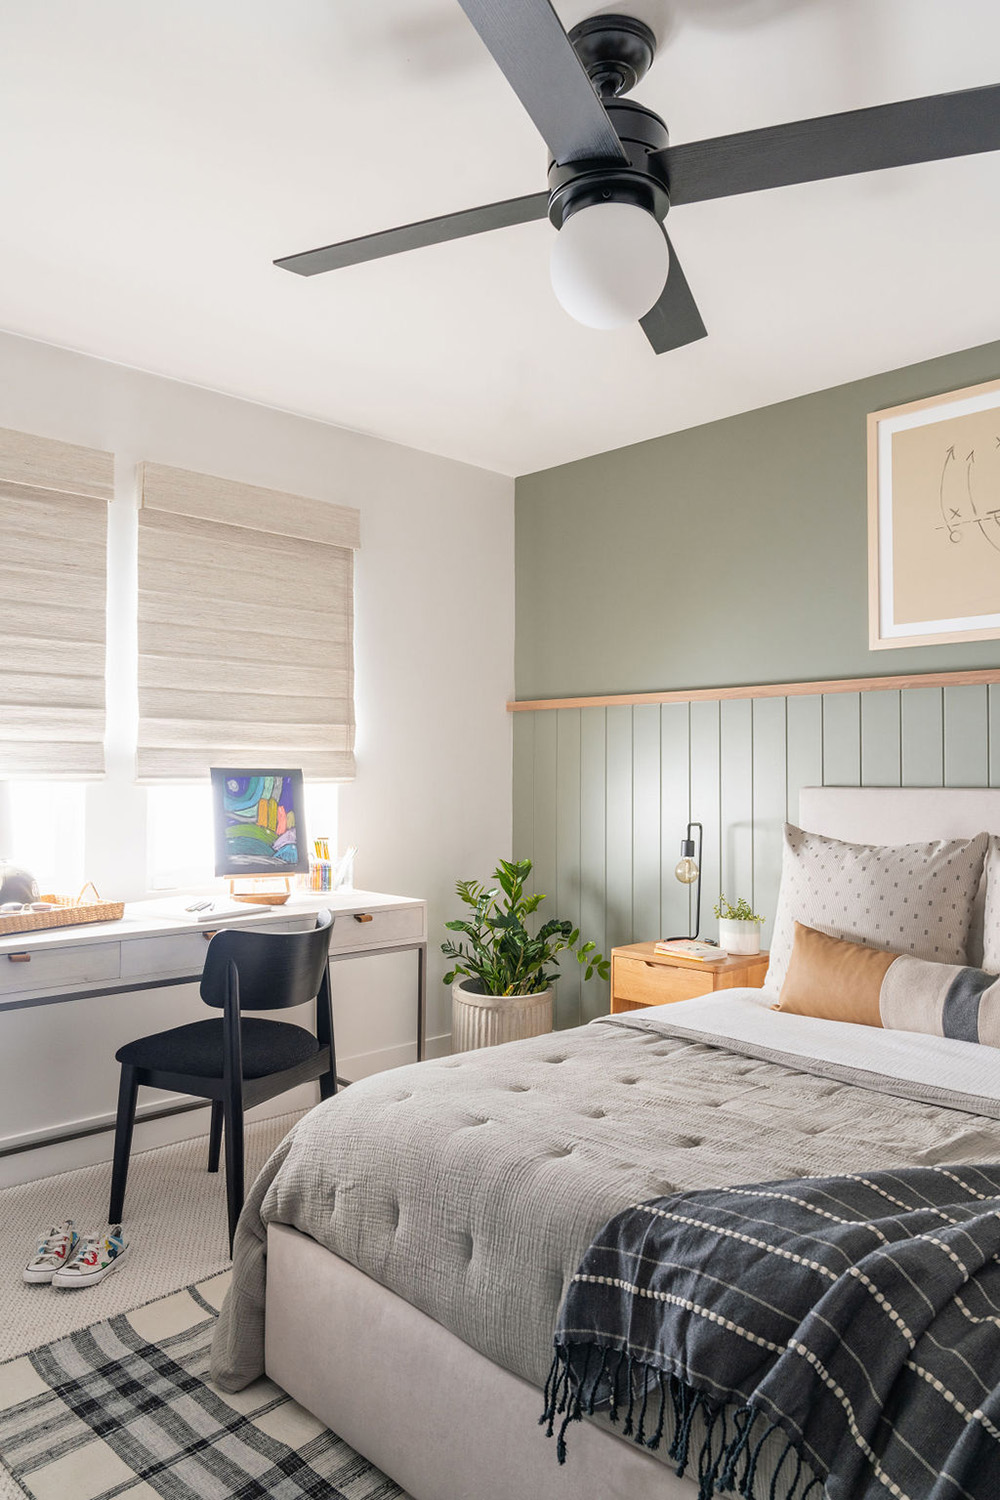 Bedroom design with green accent all and comfy details